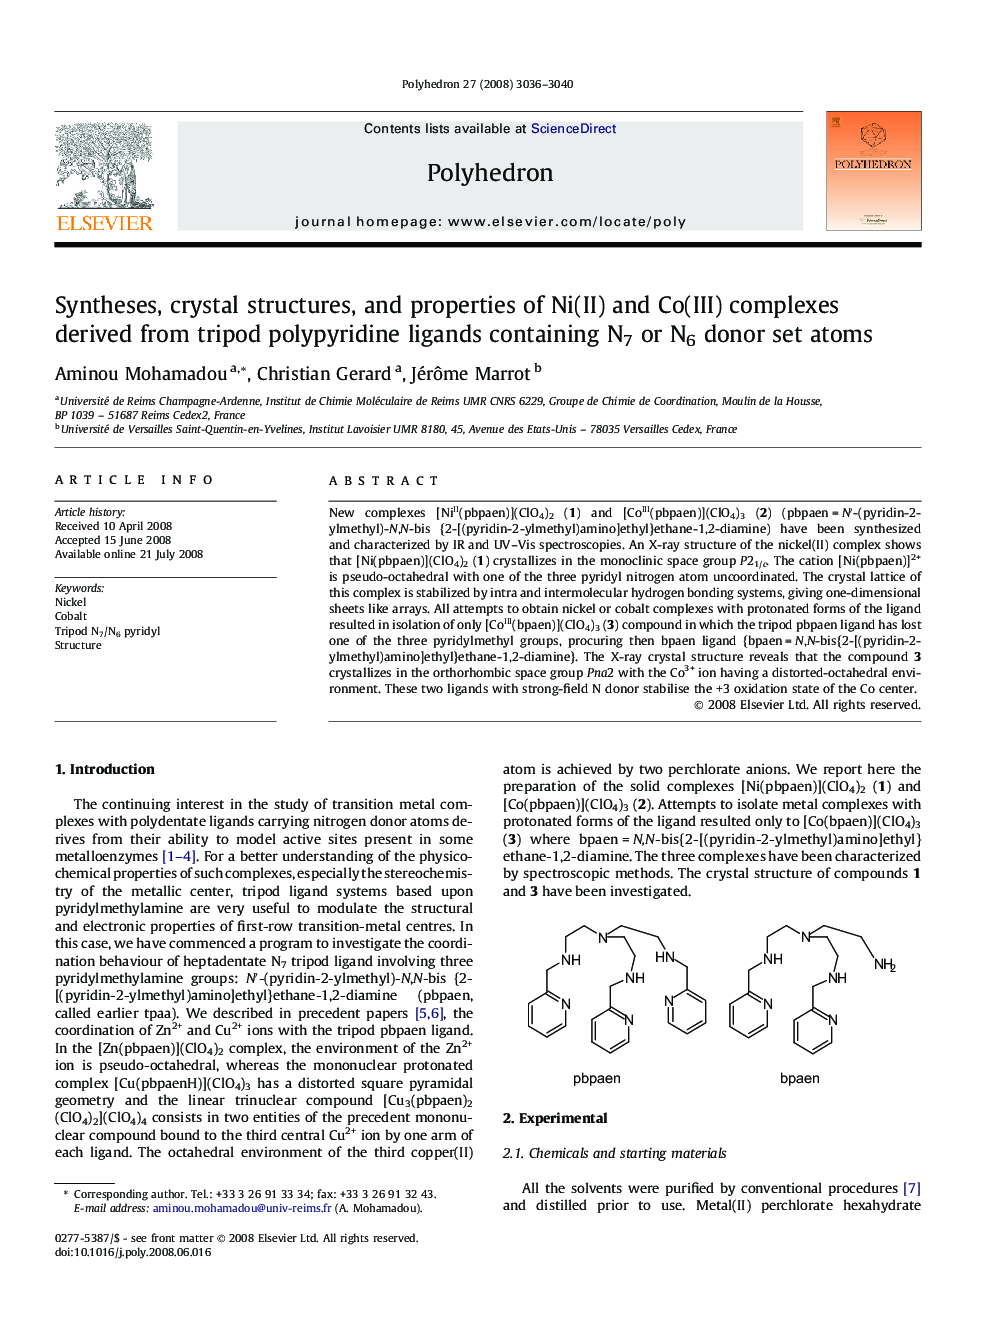 Syntheses, crystal structures, and properties of Ni(II) and Co(III) complexes derived from tripod polypyridine ligands containing N7 or N6 donor set atoms